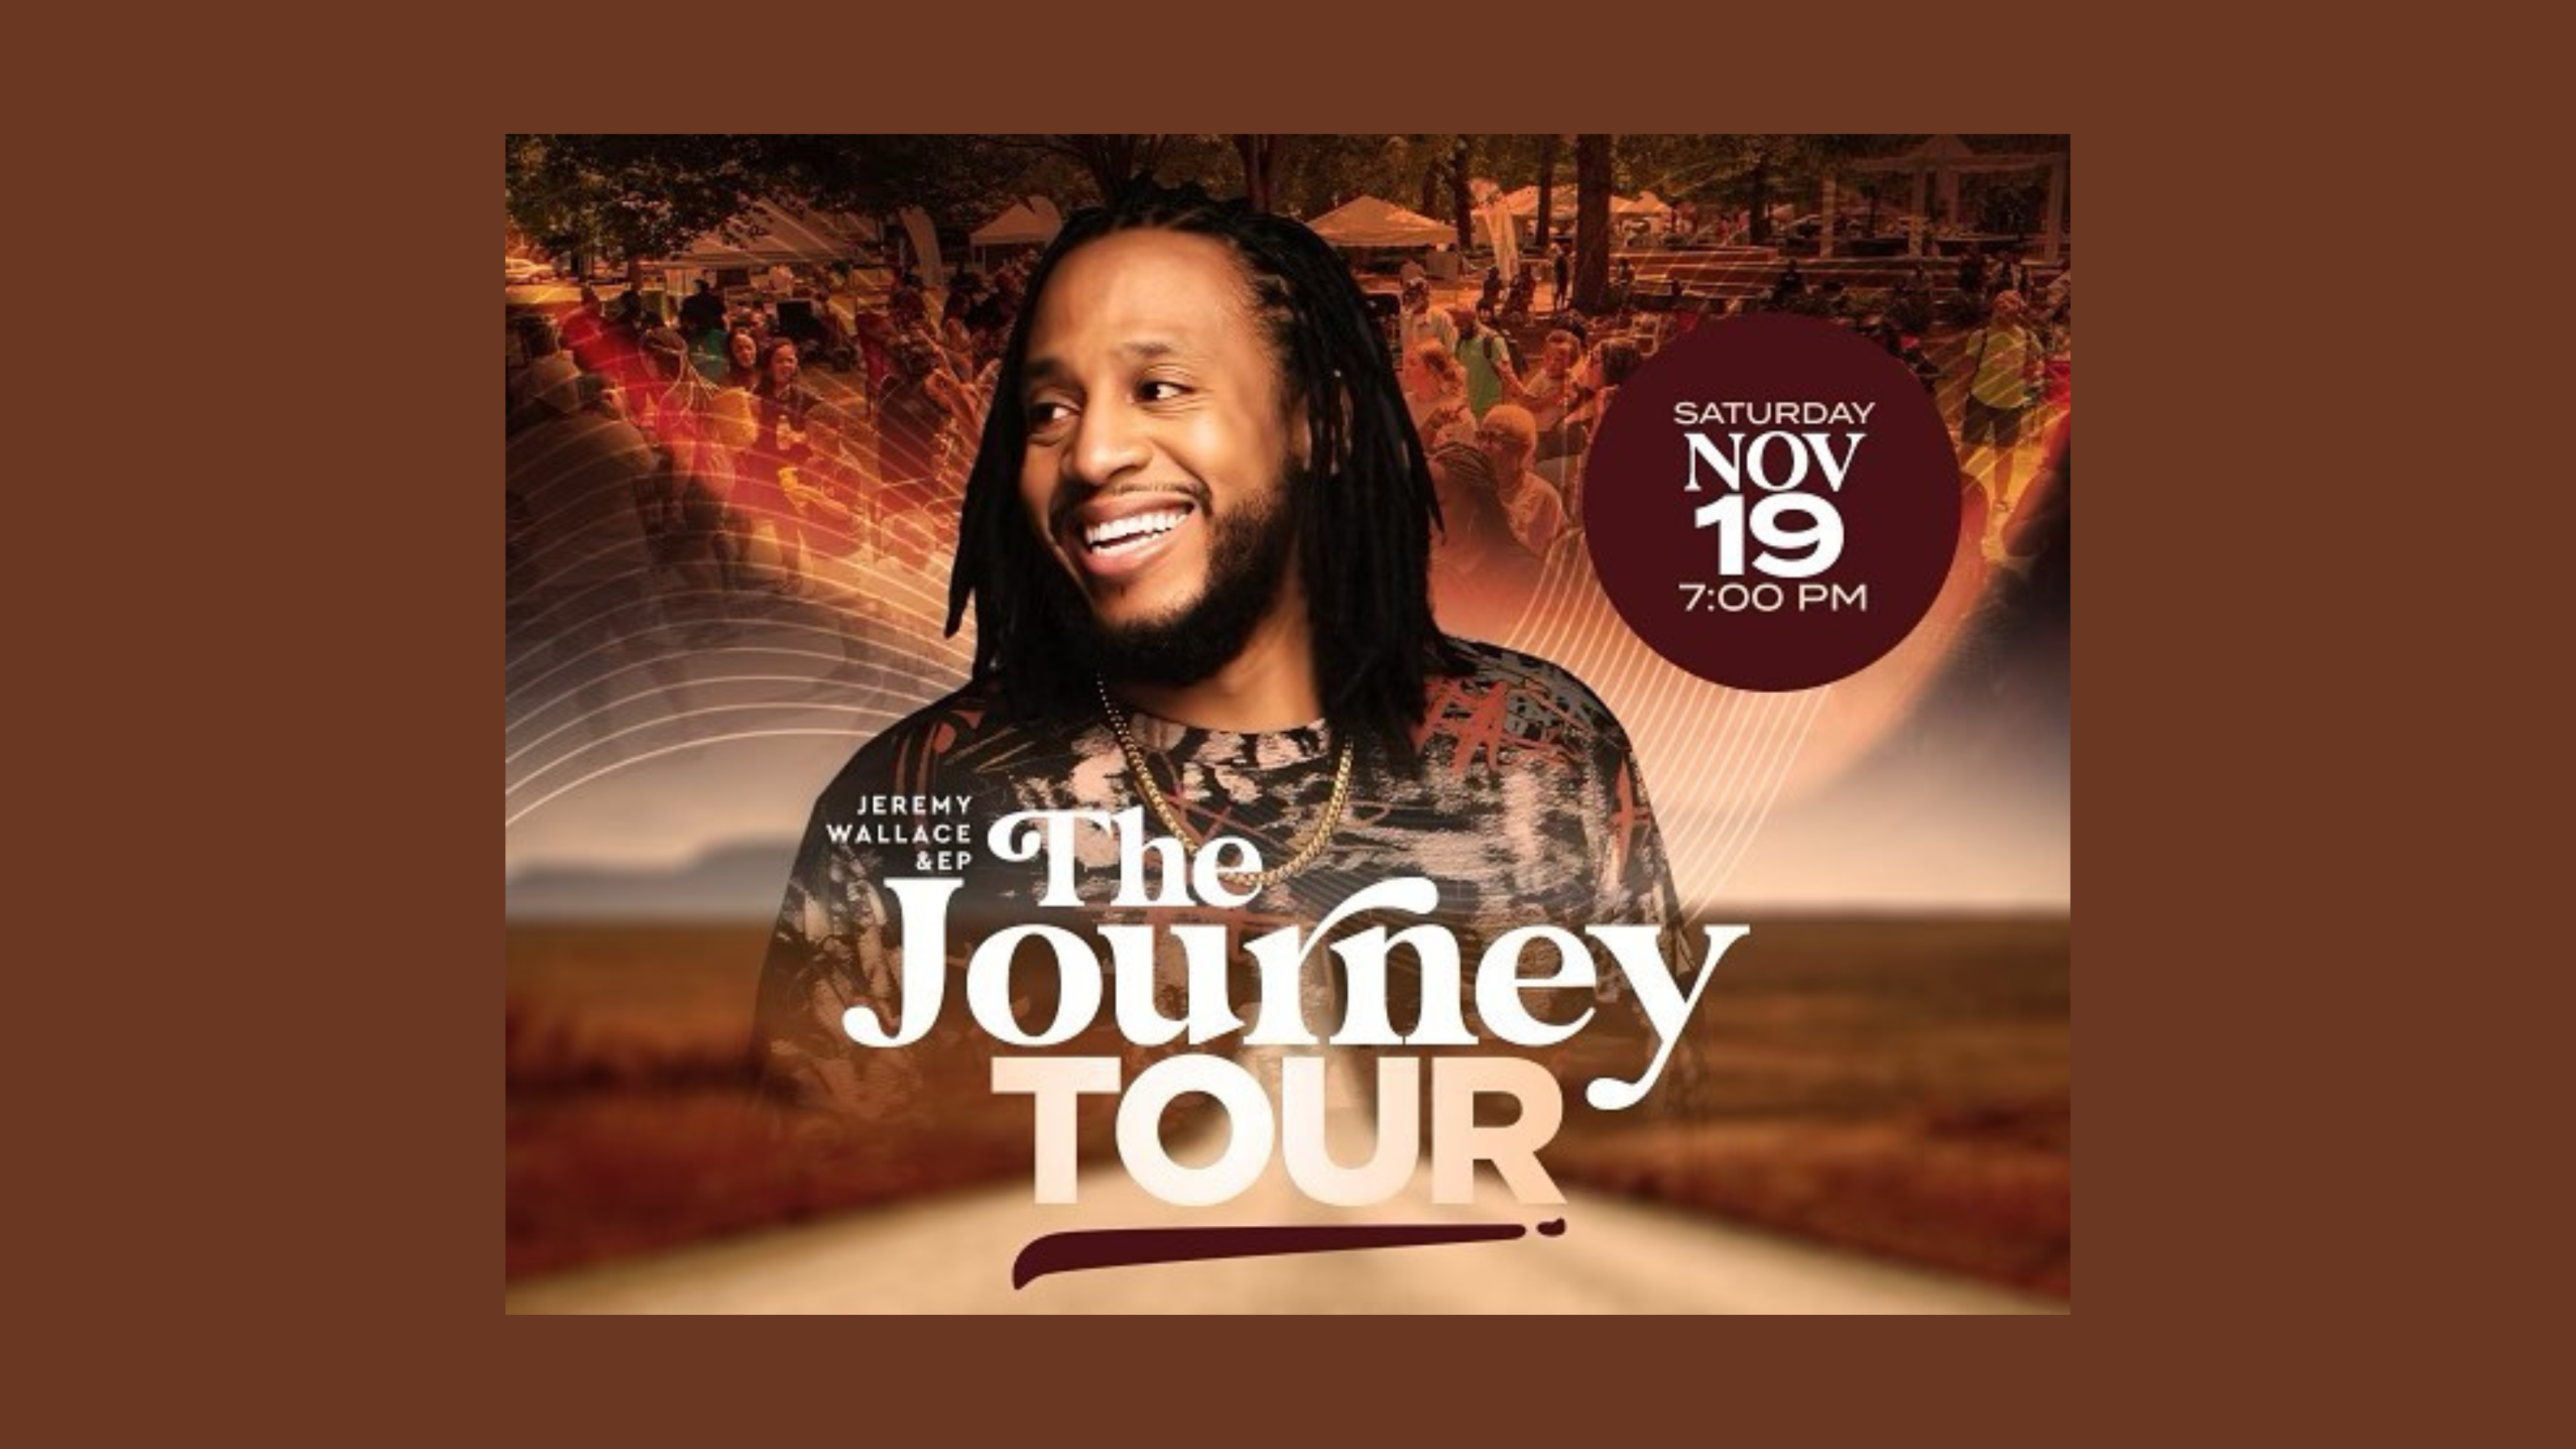 jeremy wallace & ep 2022 the journey tour (1)